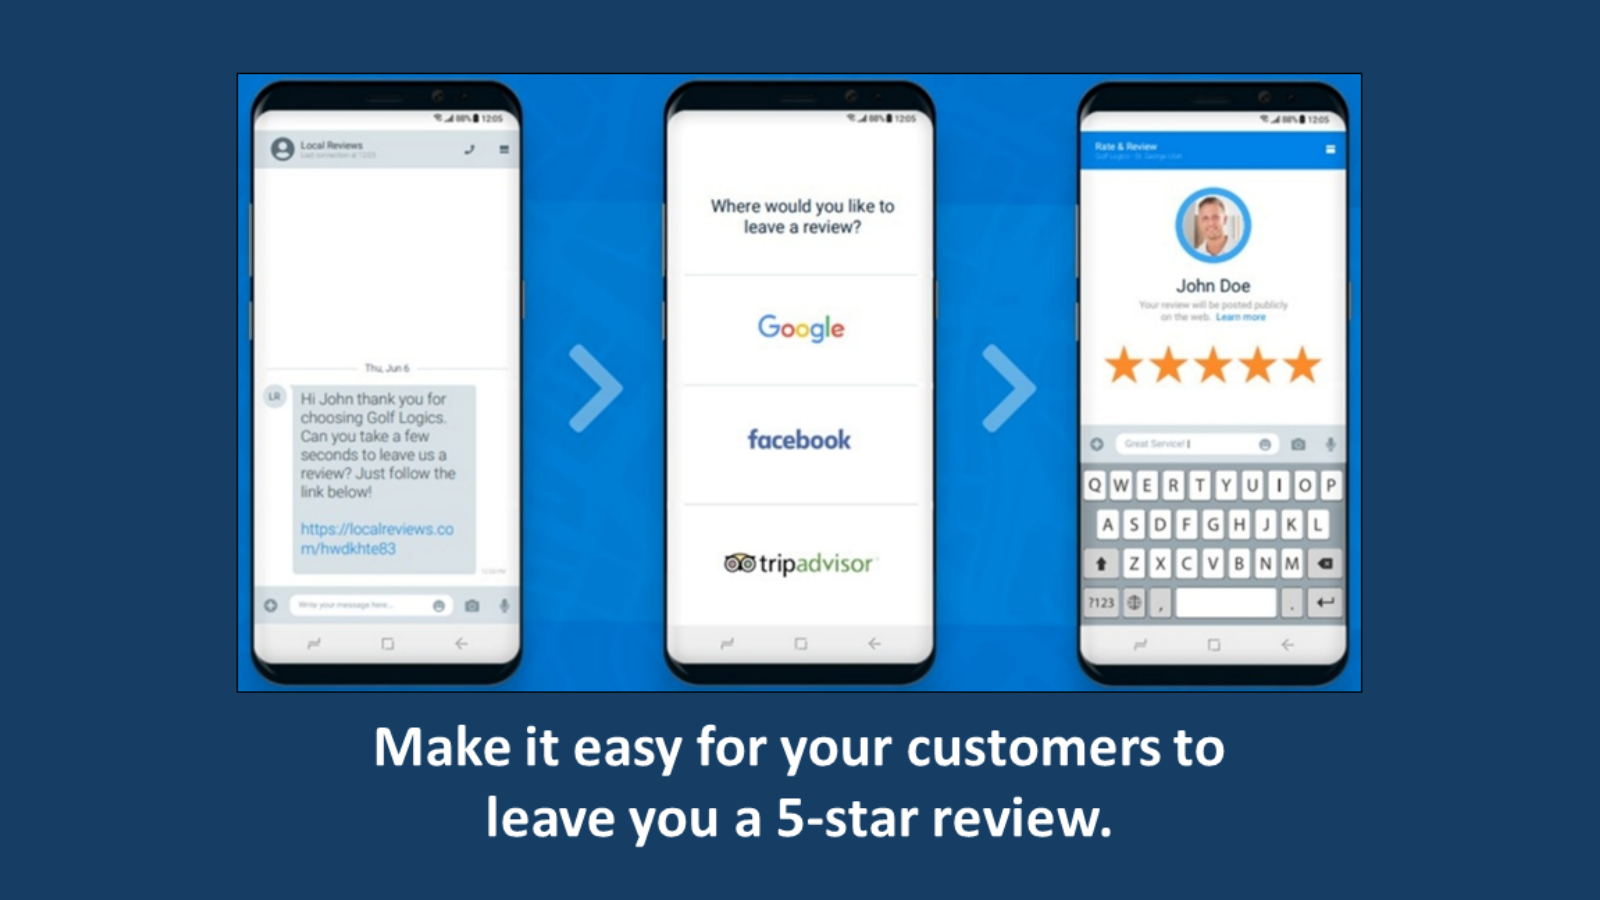 Easy for Customers to Leave a 5-Star Review